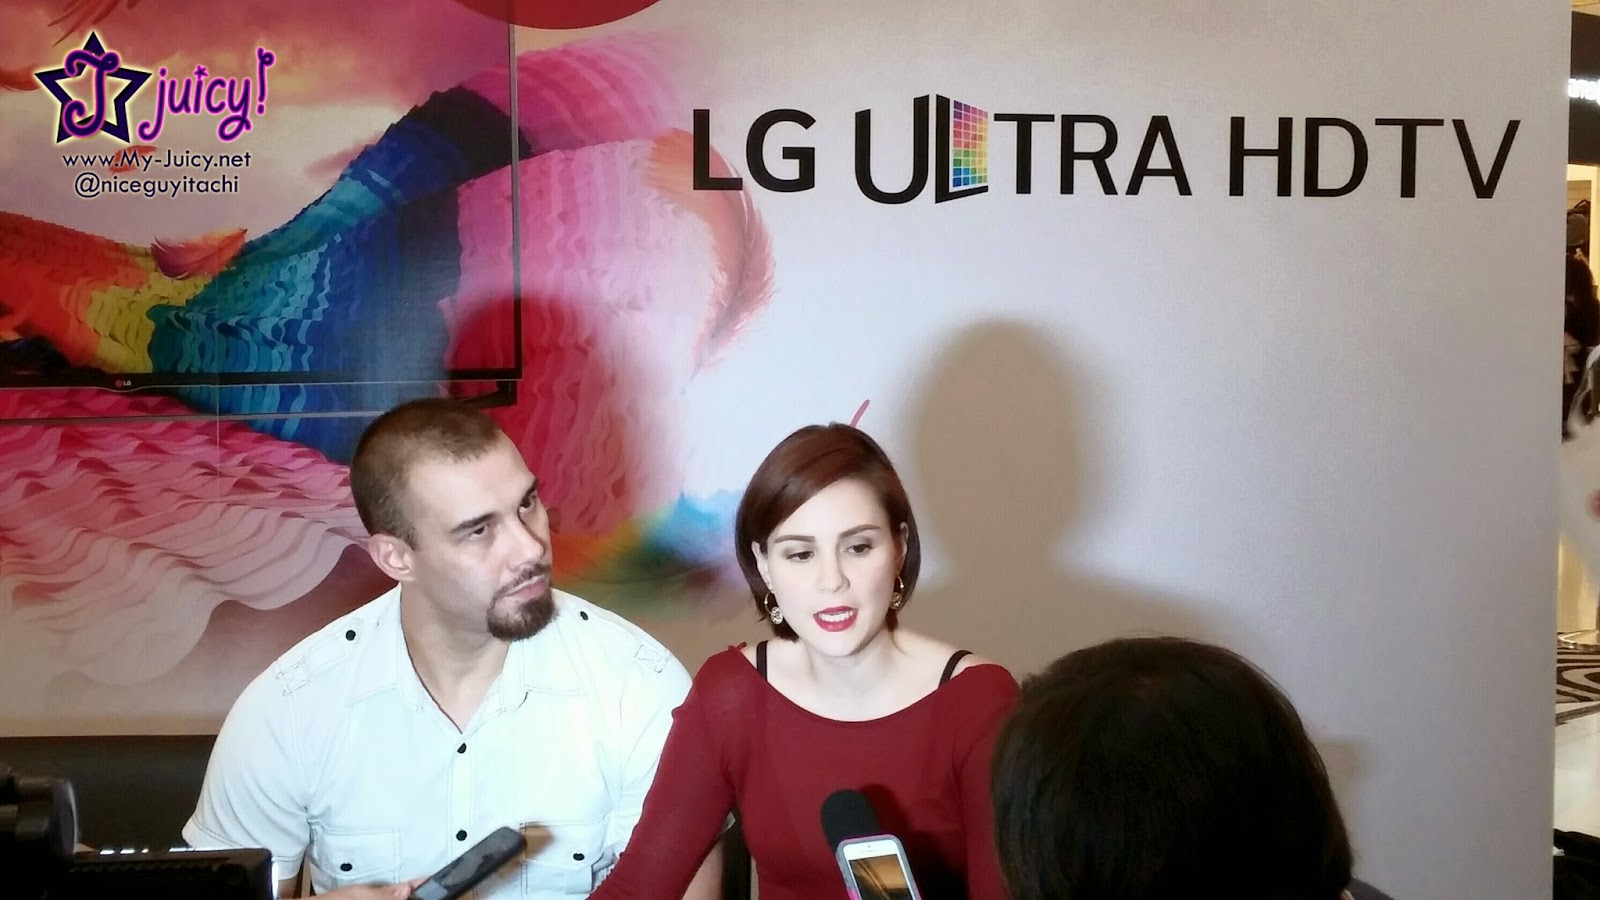 LG Electronics unveils Ultra HD TV with real 4K Technology